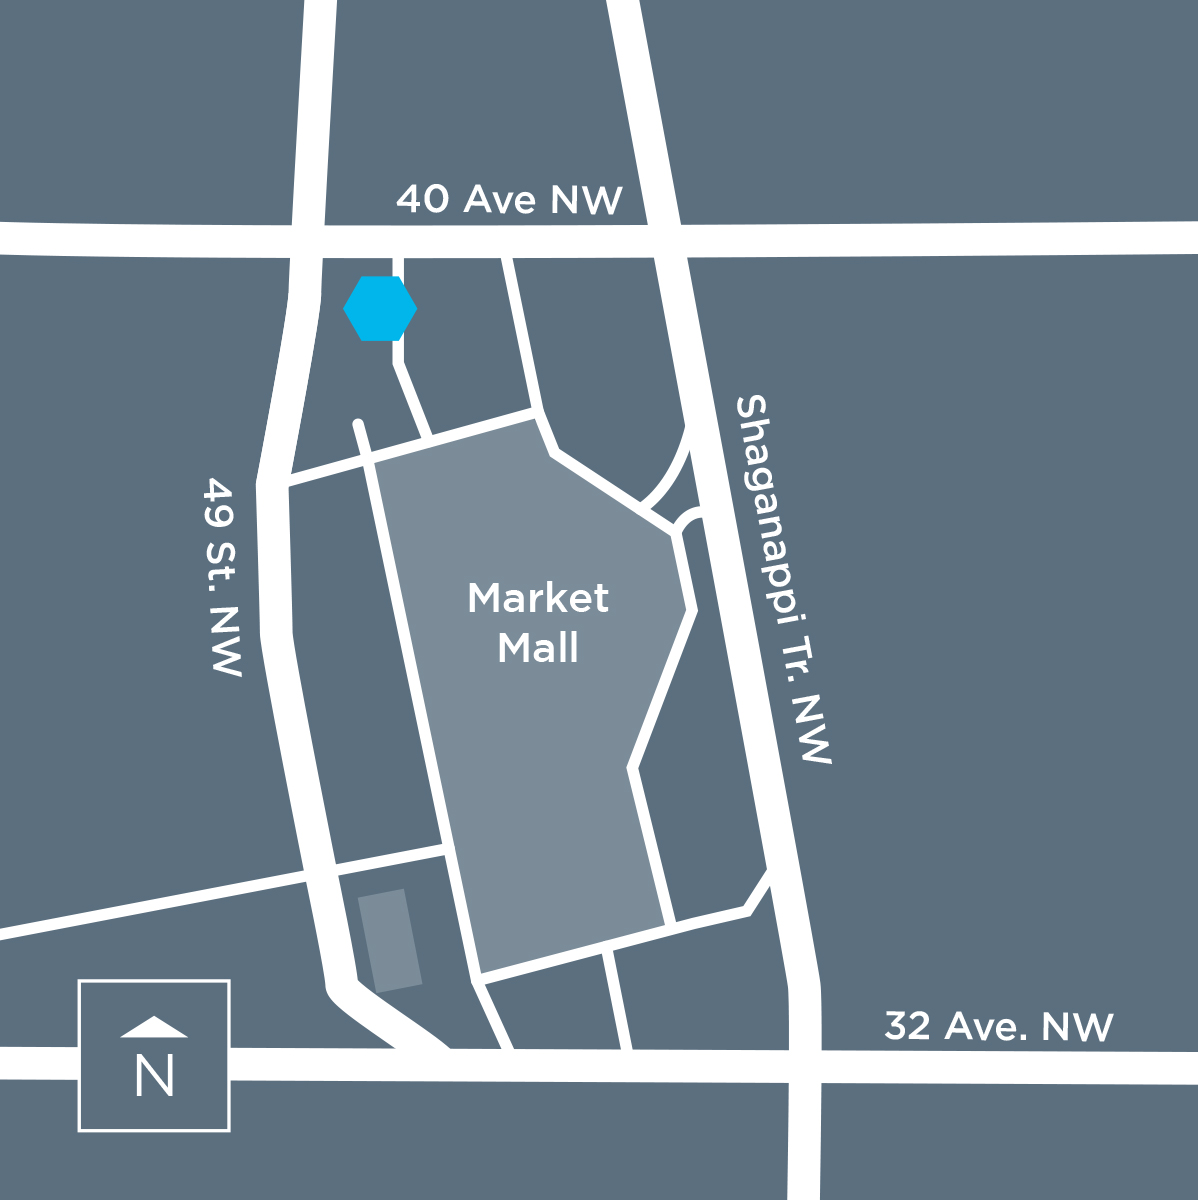 Market Mall - Map and Directions - Mayfair Diagnostics